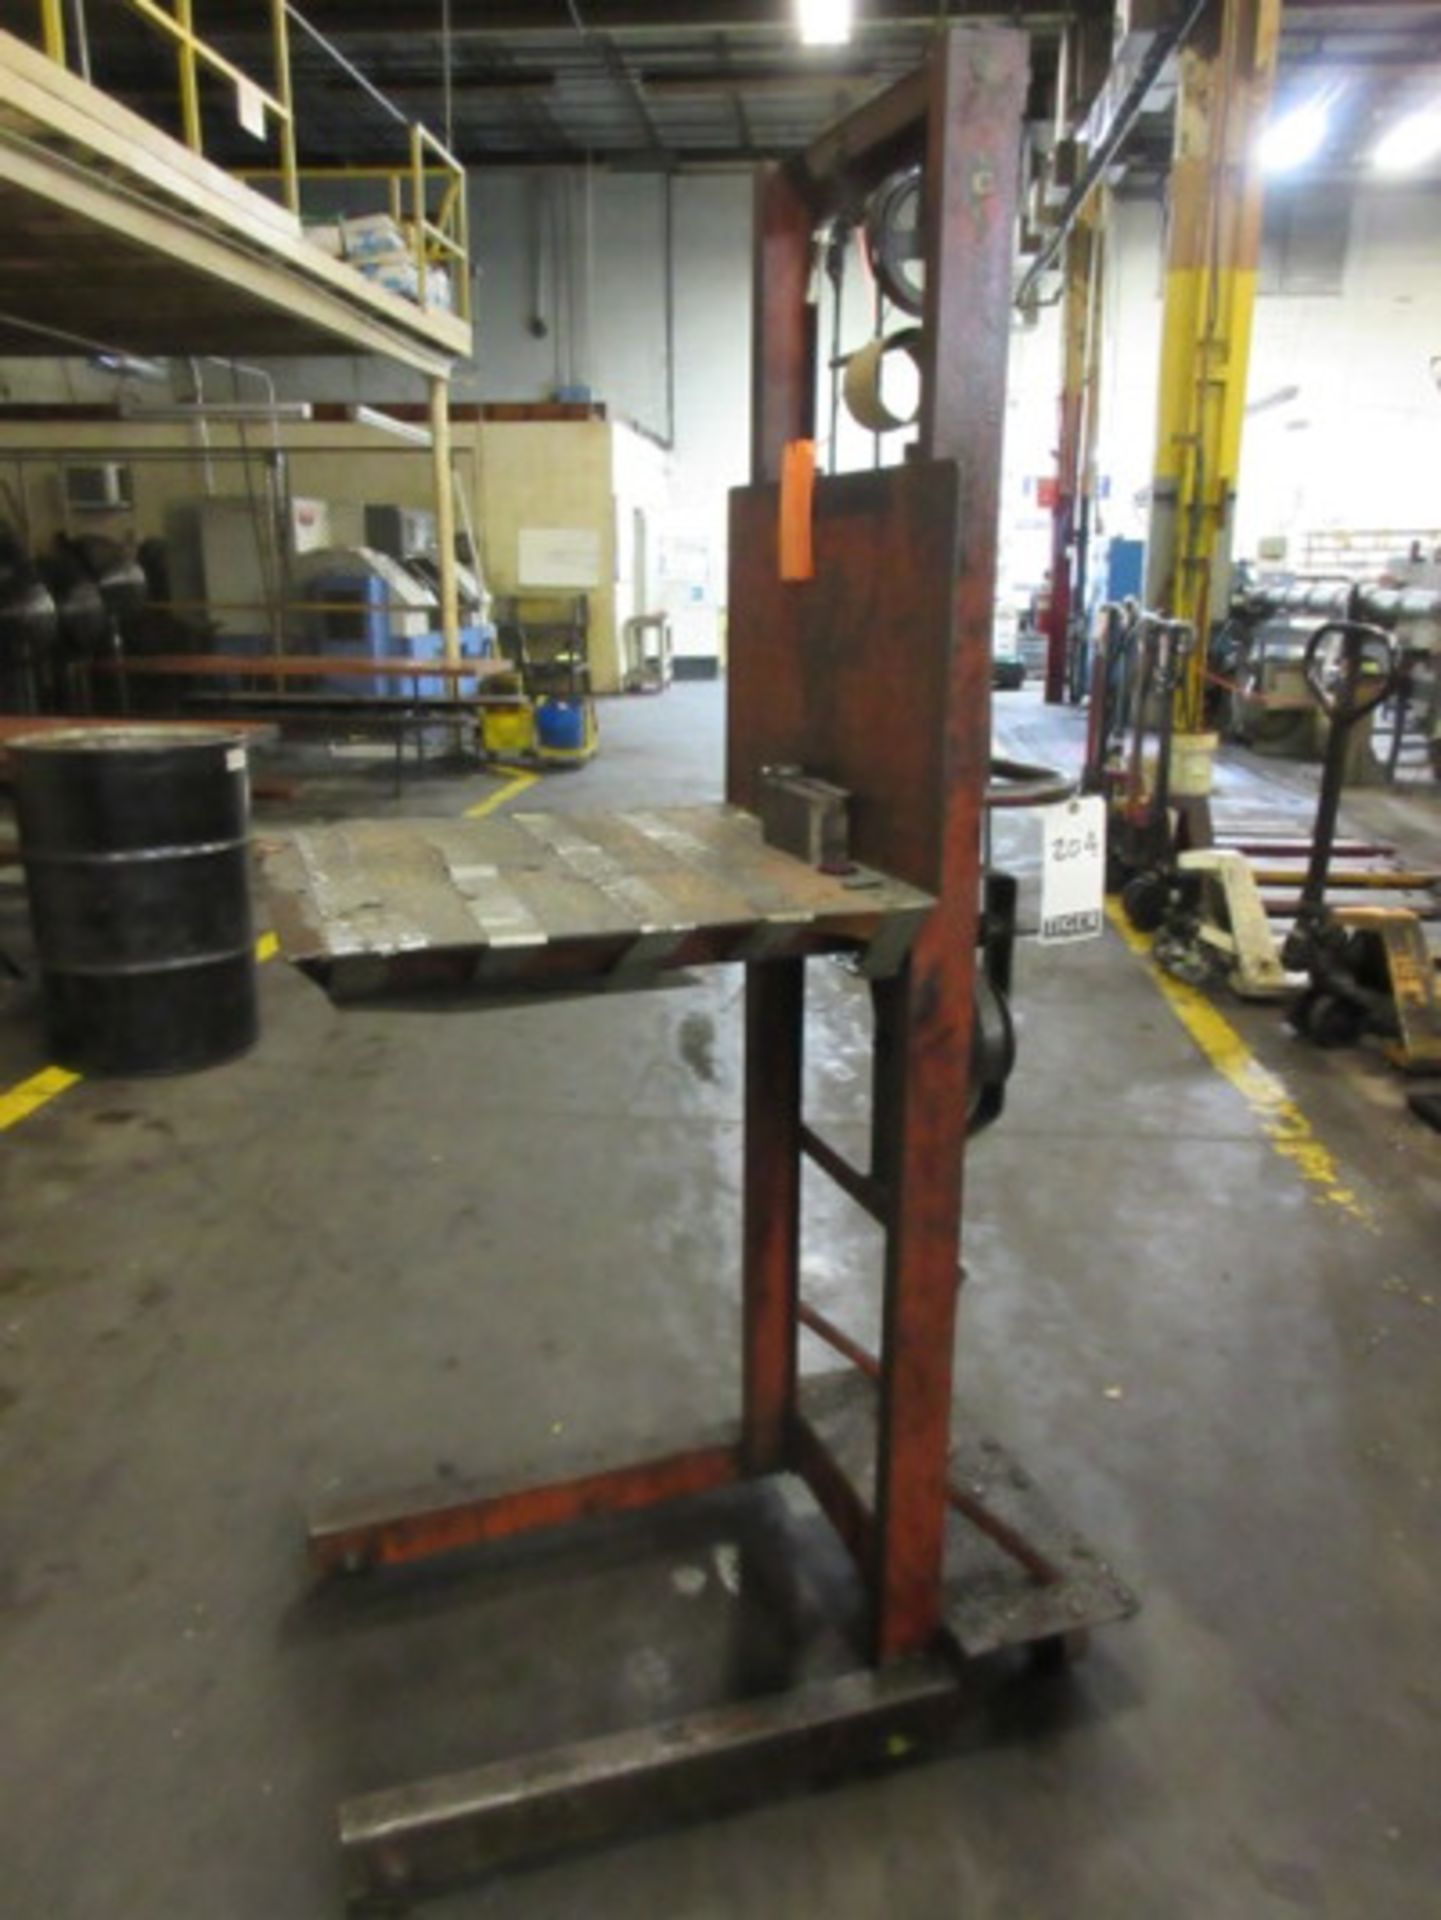 Work Winch Table, Max Capacity 750lbs, Unknown Manufacturer, Missing Crank Handle - Lot Location: